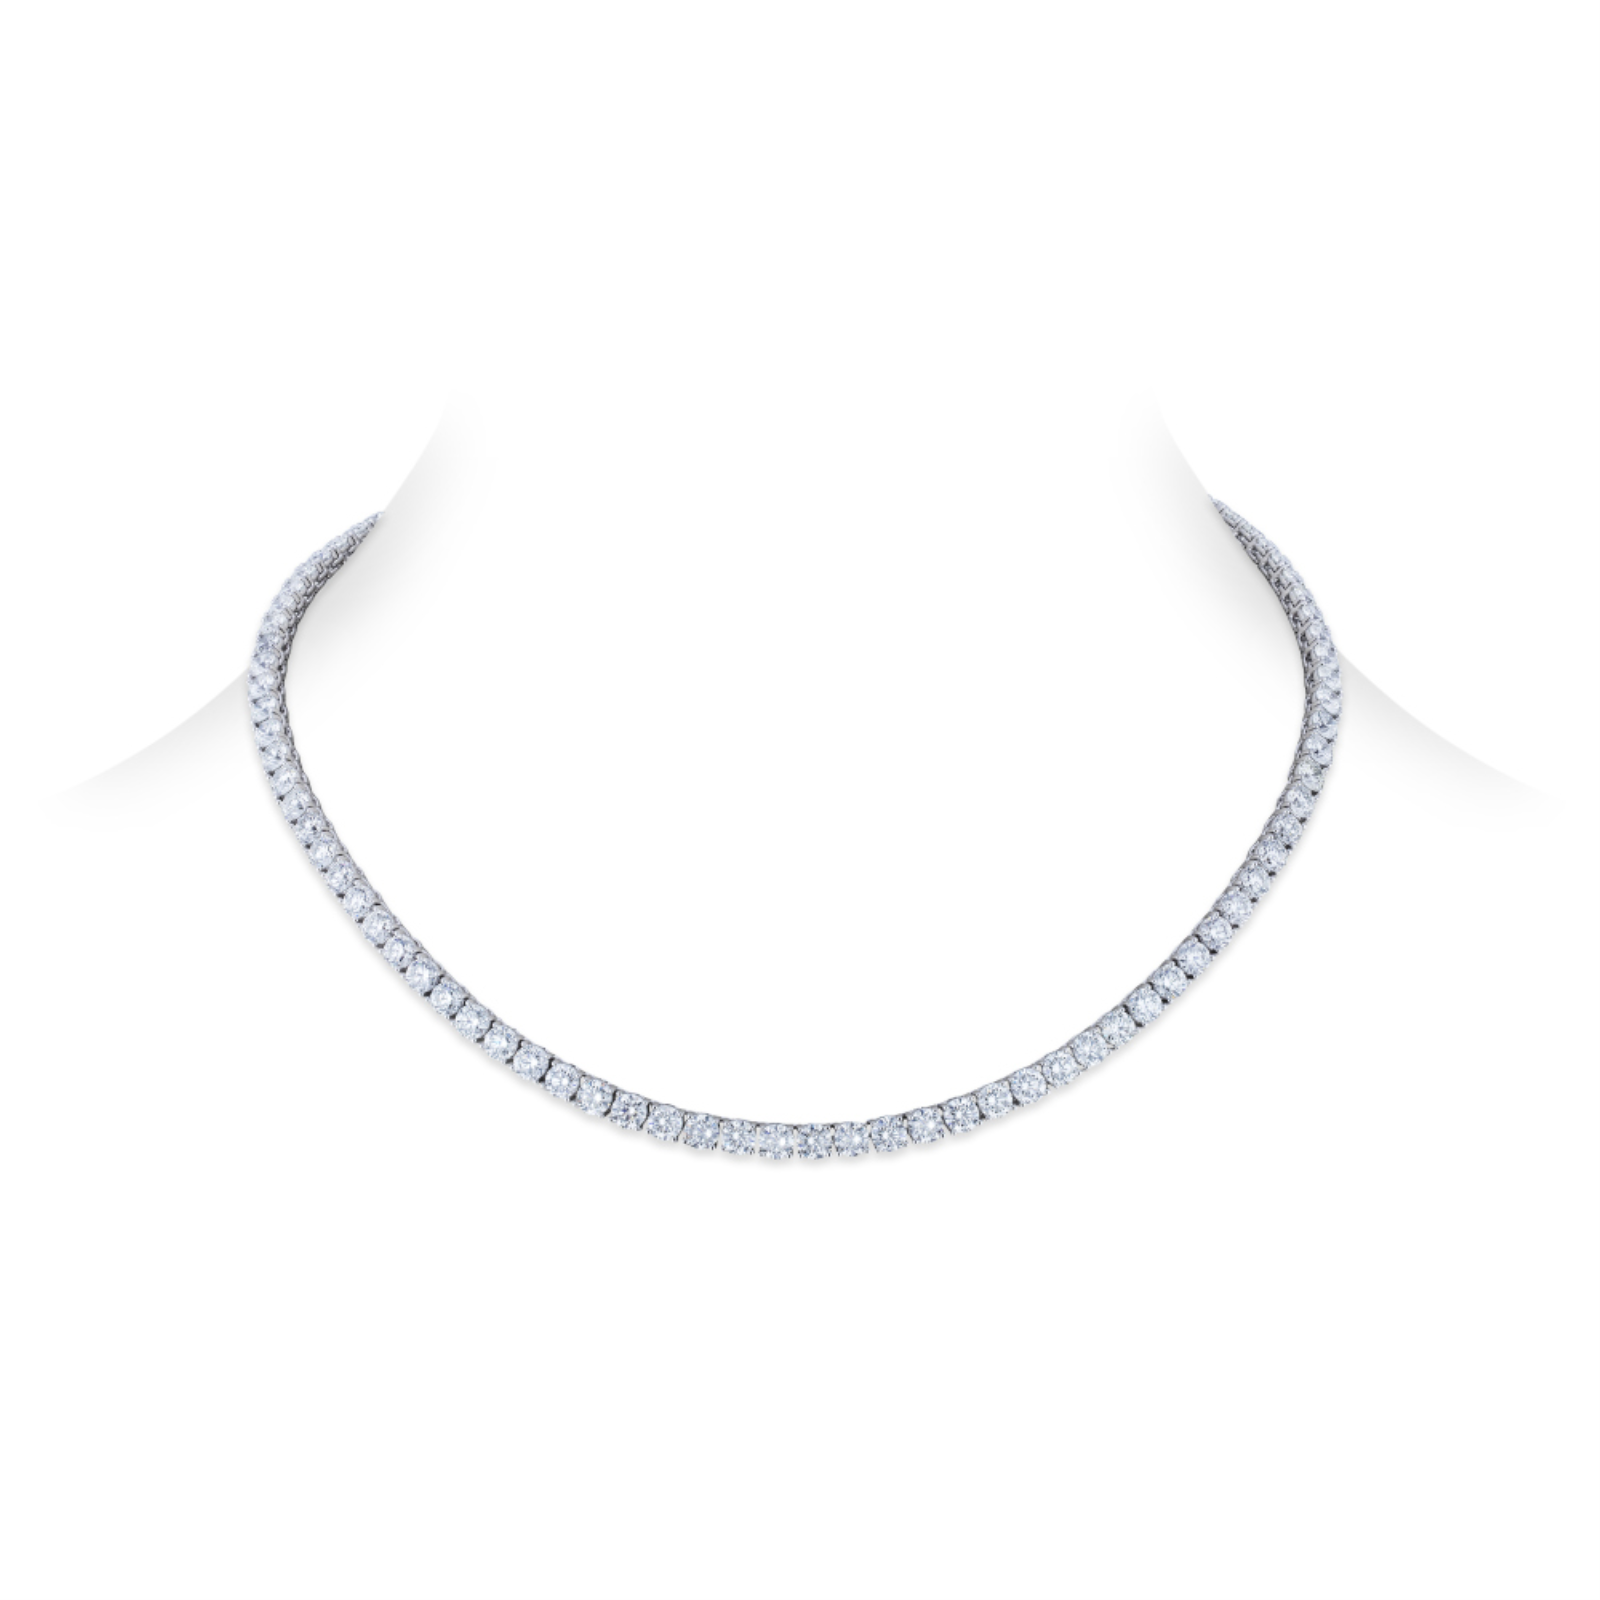 White Gold and Diamond Tennis Necklace